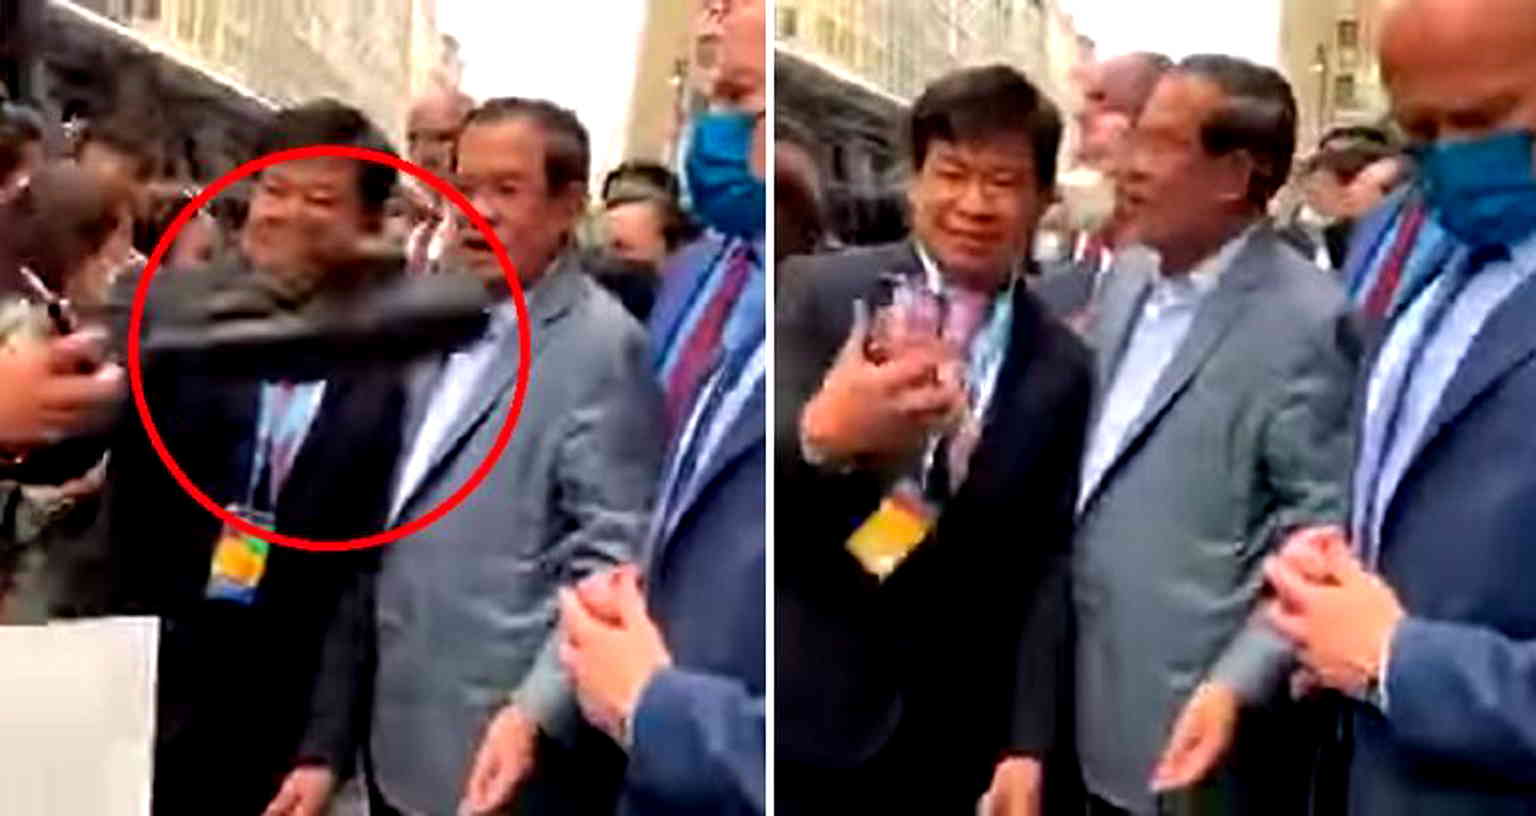 Man plans to sell shoe he threw at Cambodian prime minister for $1 million for charity